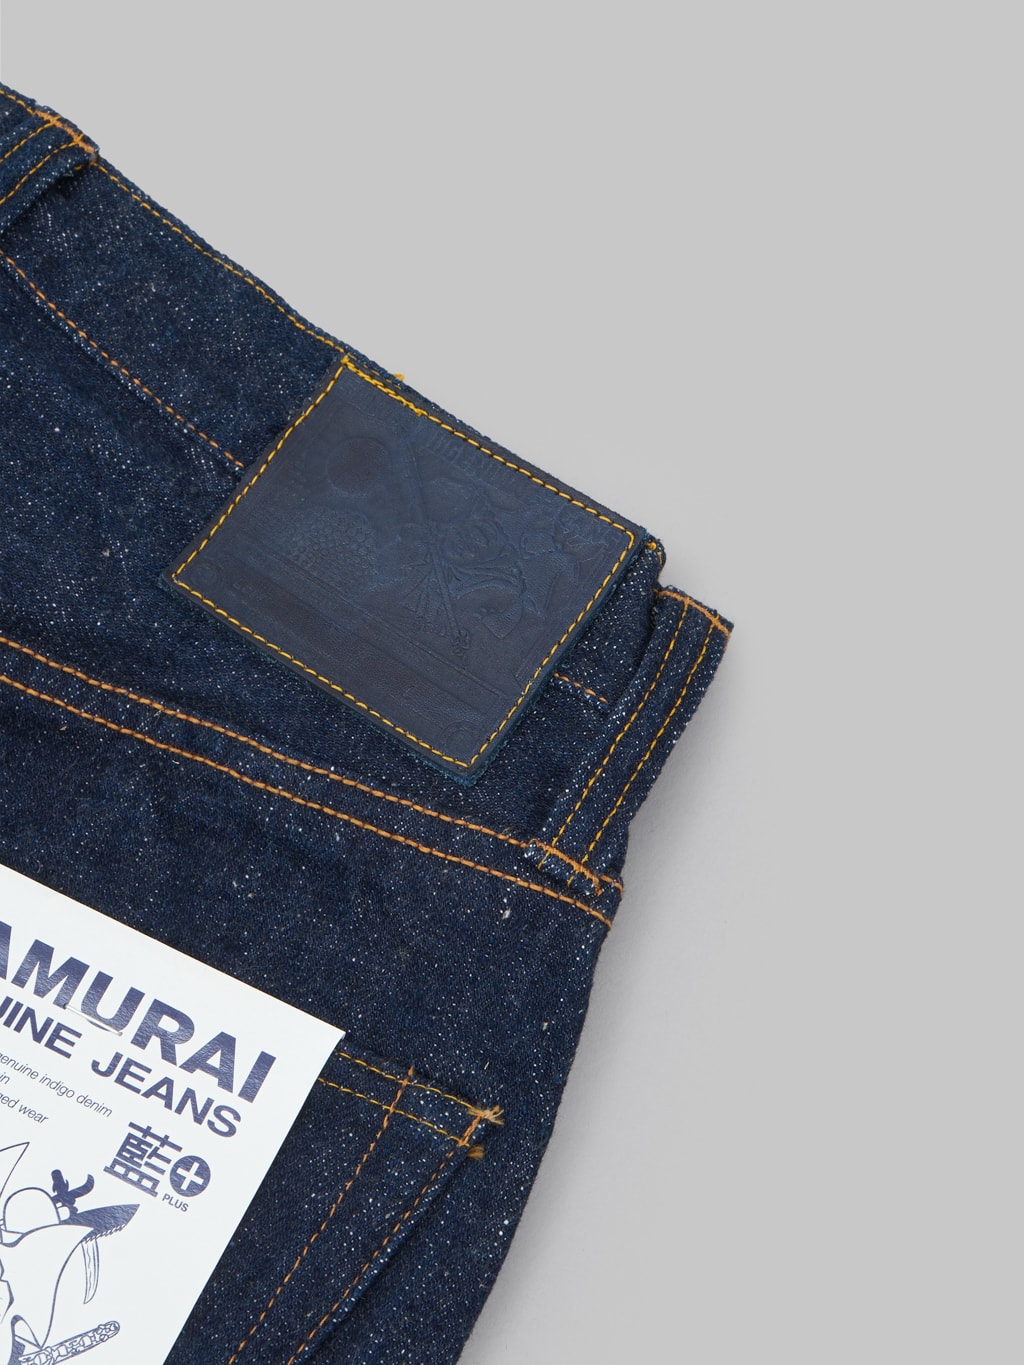 samurai jeans s211ax ai benkei natural indigo 18oz relaxed tapered jeans patch